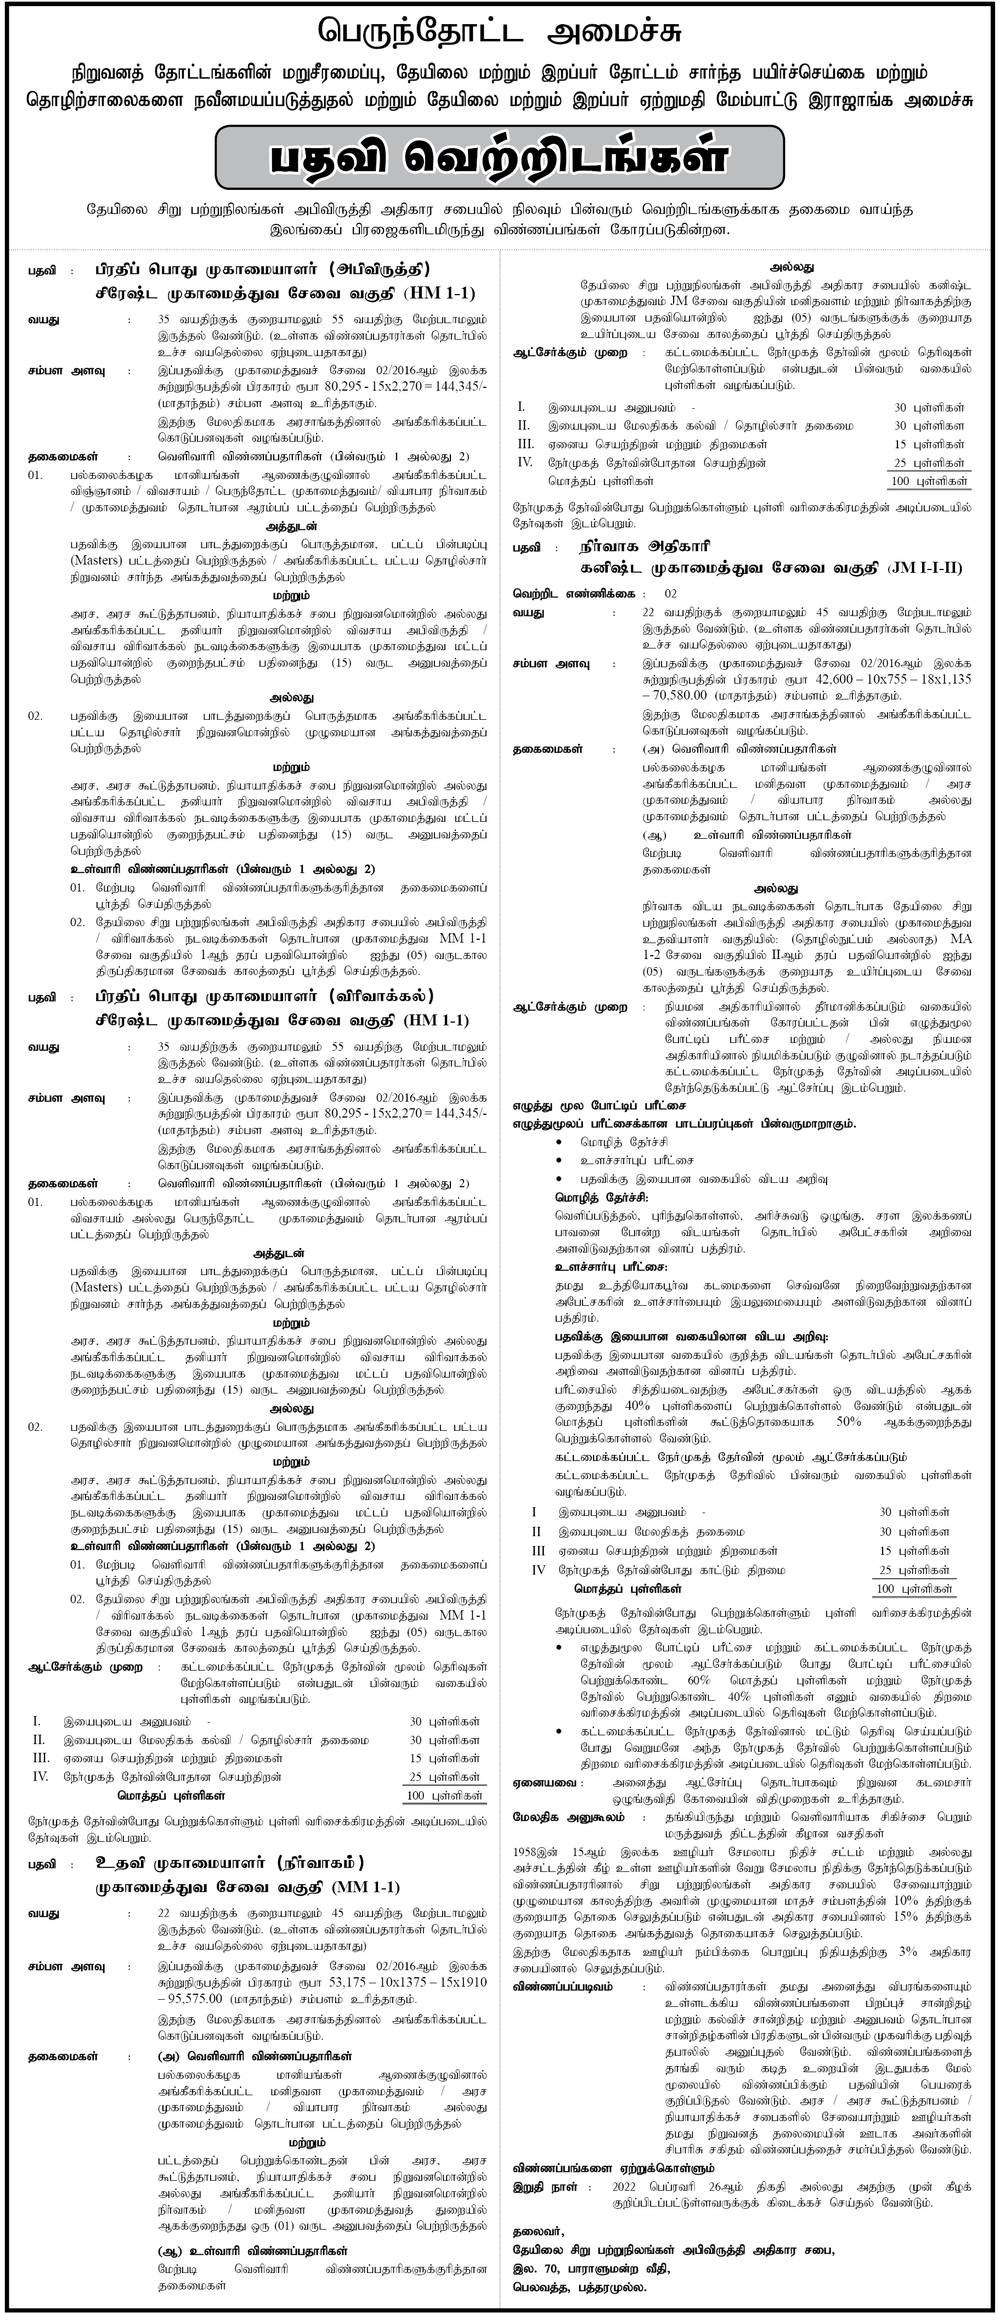 Director (Media & Publicity) Vacancy in Board of Investment of Sri Lanka